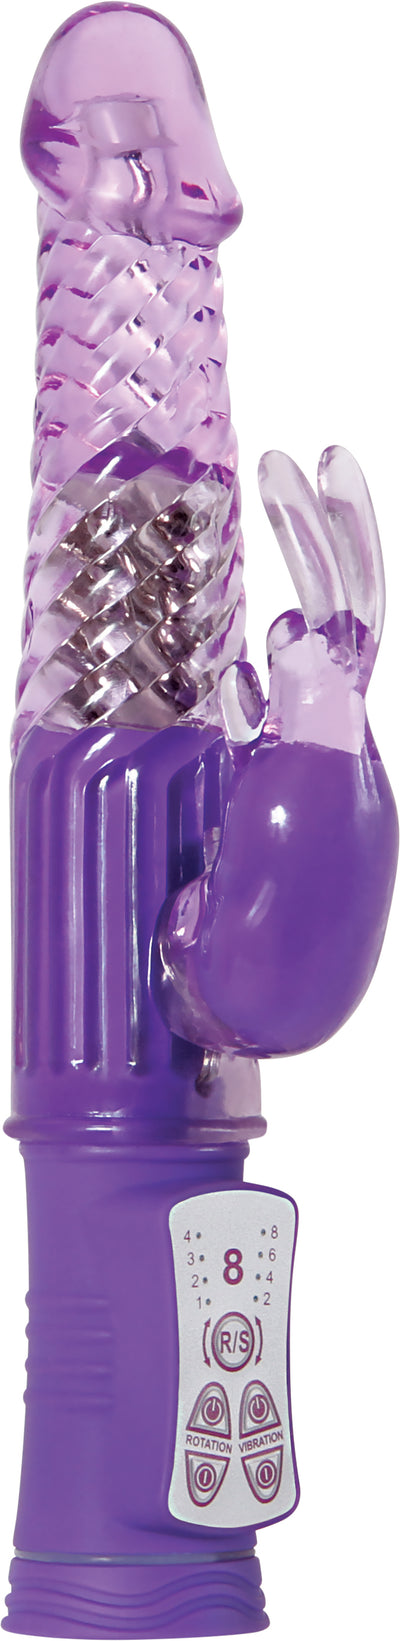 Rechargeable Rabbit Vibrator with Duo-Directional Rotation and Clitoral Stimulation - Waterproof and Phthalate-Free